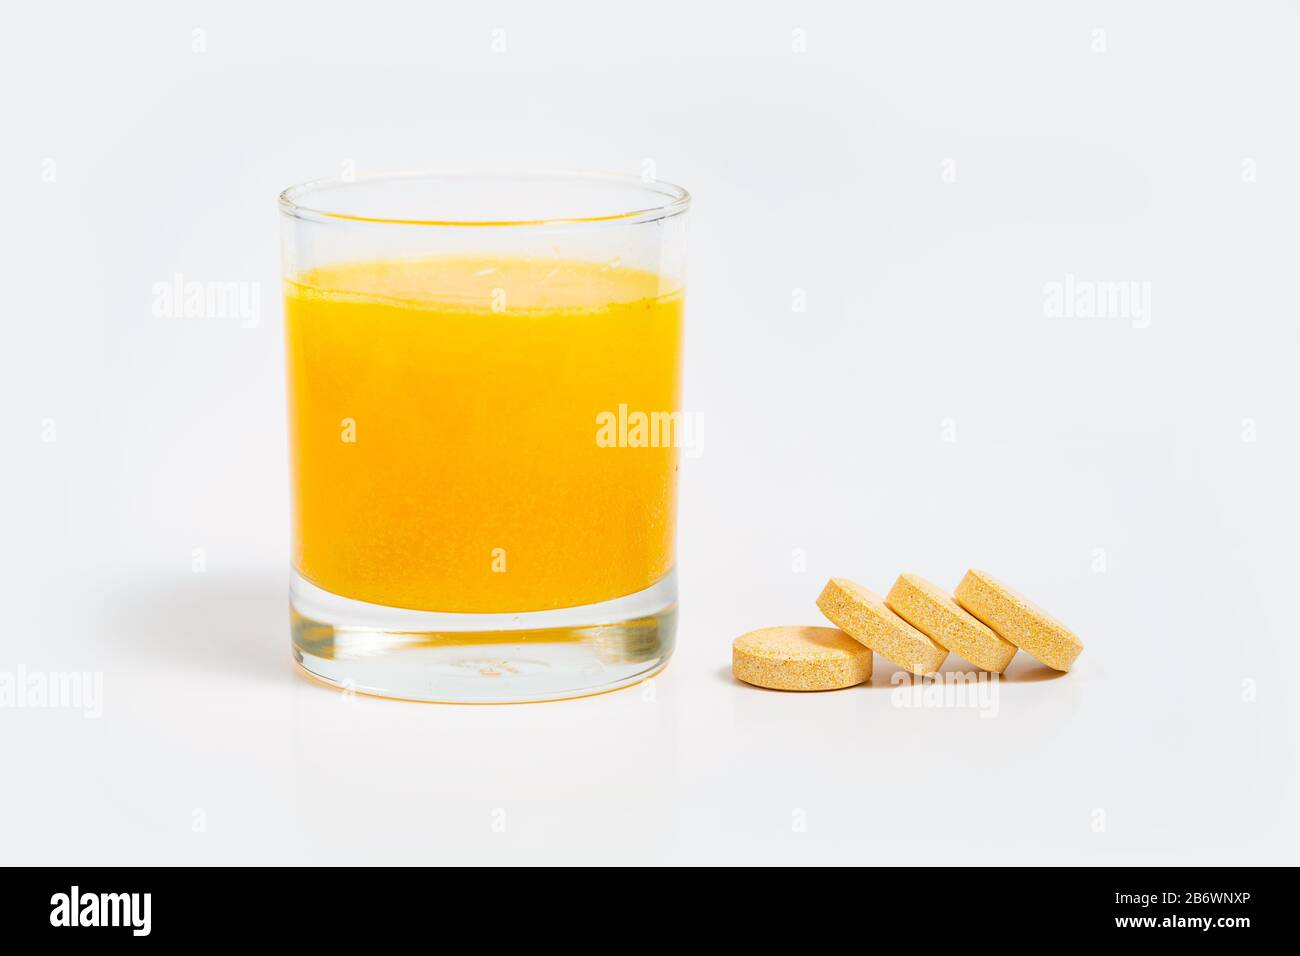 Effervescent tablet of vitamin c and zinc supplement Stock Photo